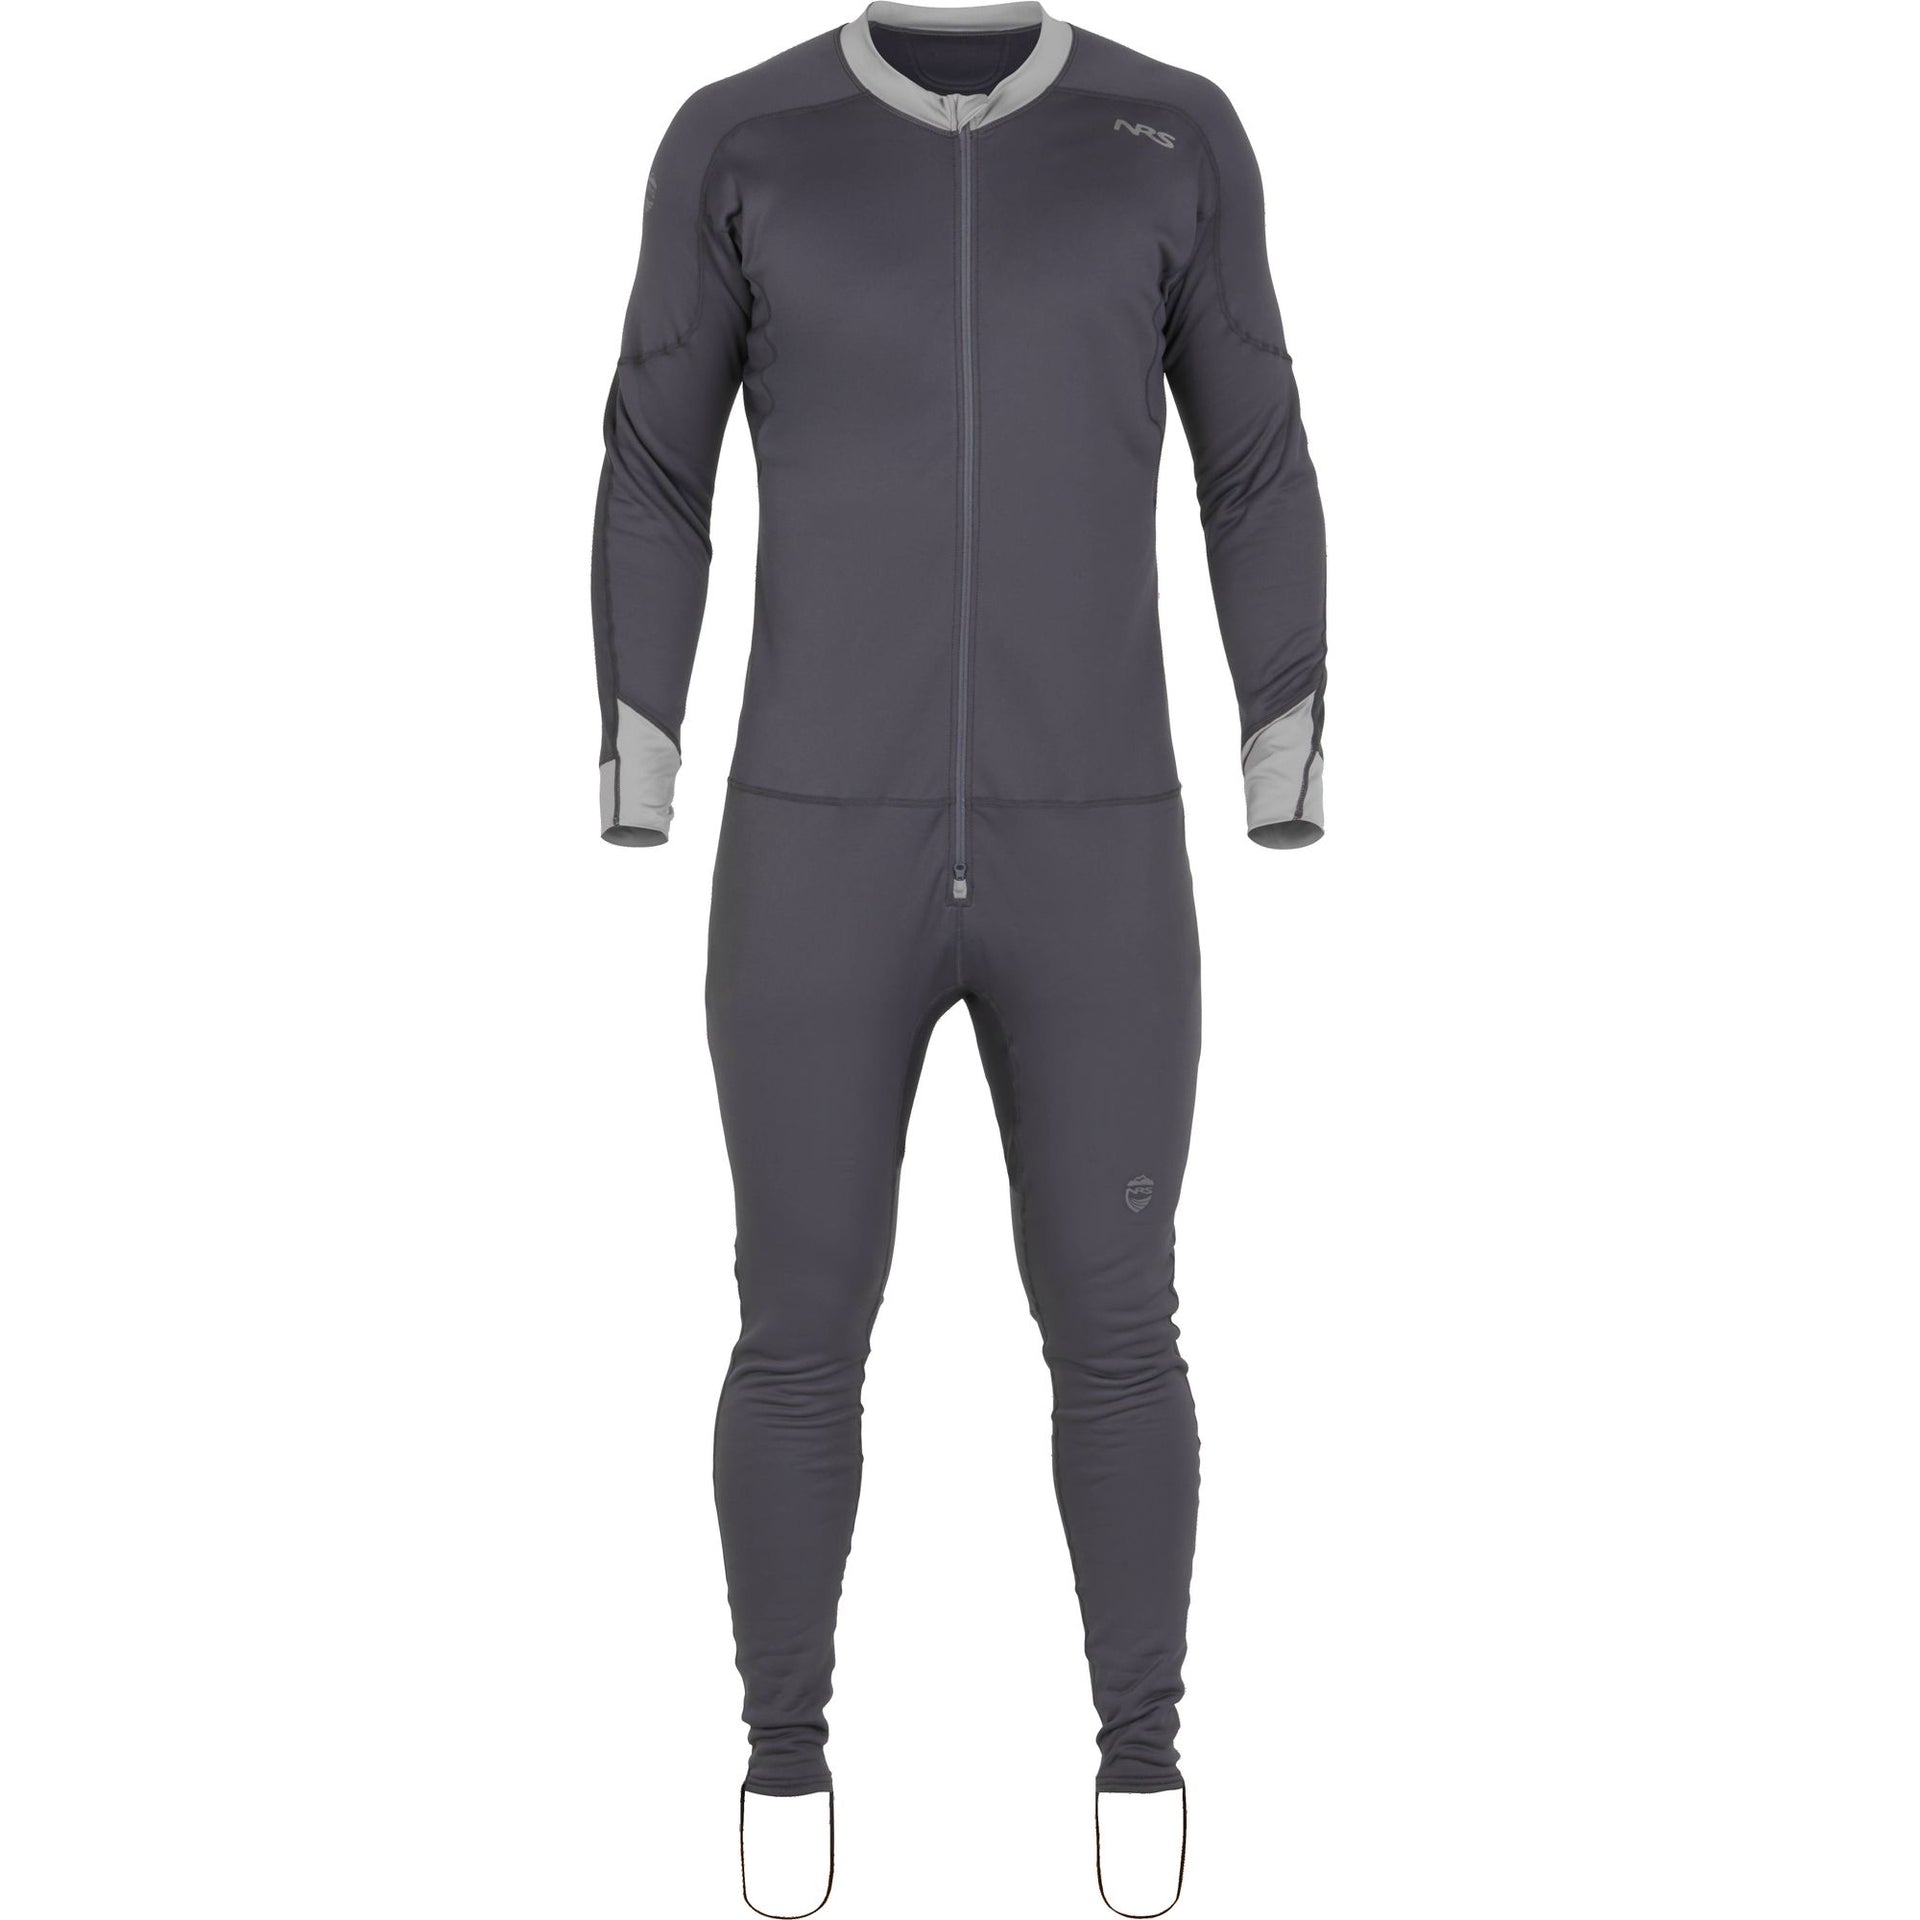 Men's Expedition Weight Union Suit